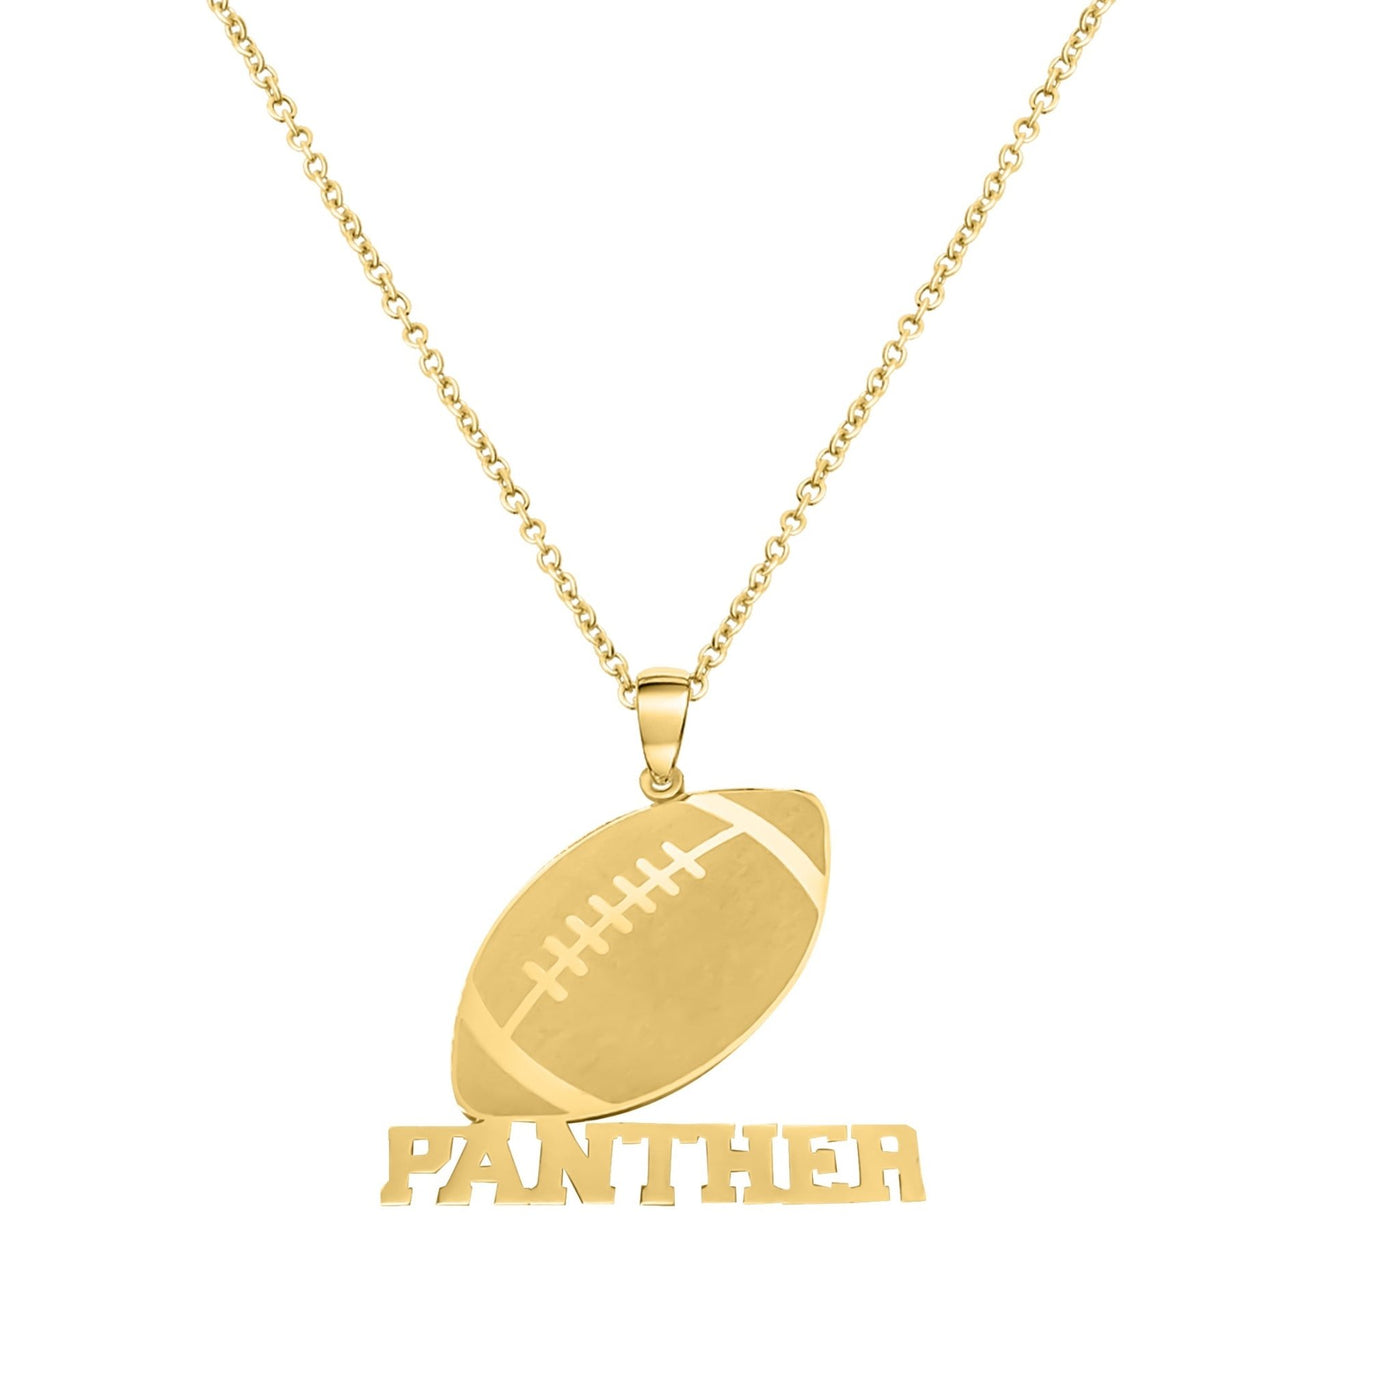 CC Sport Gold Football Charm Necklace by Chelsea Charles | Chelsea Charles  Jewelry